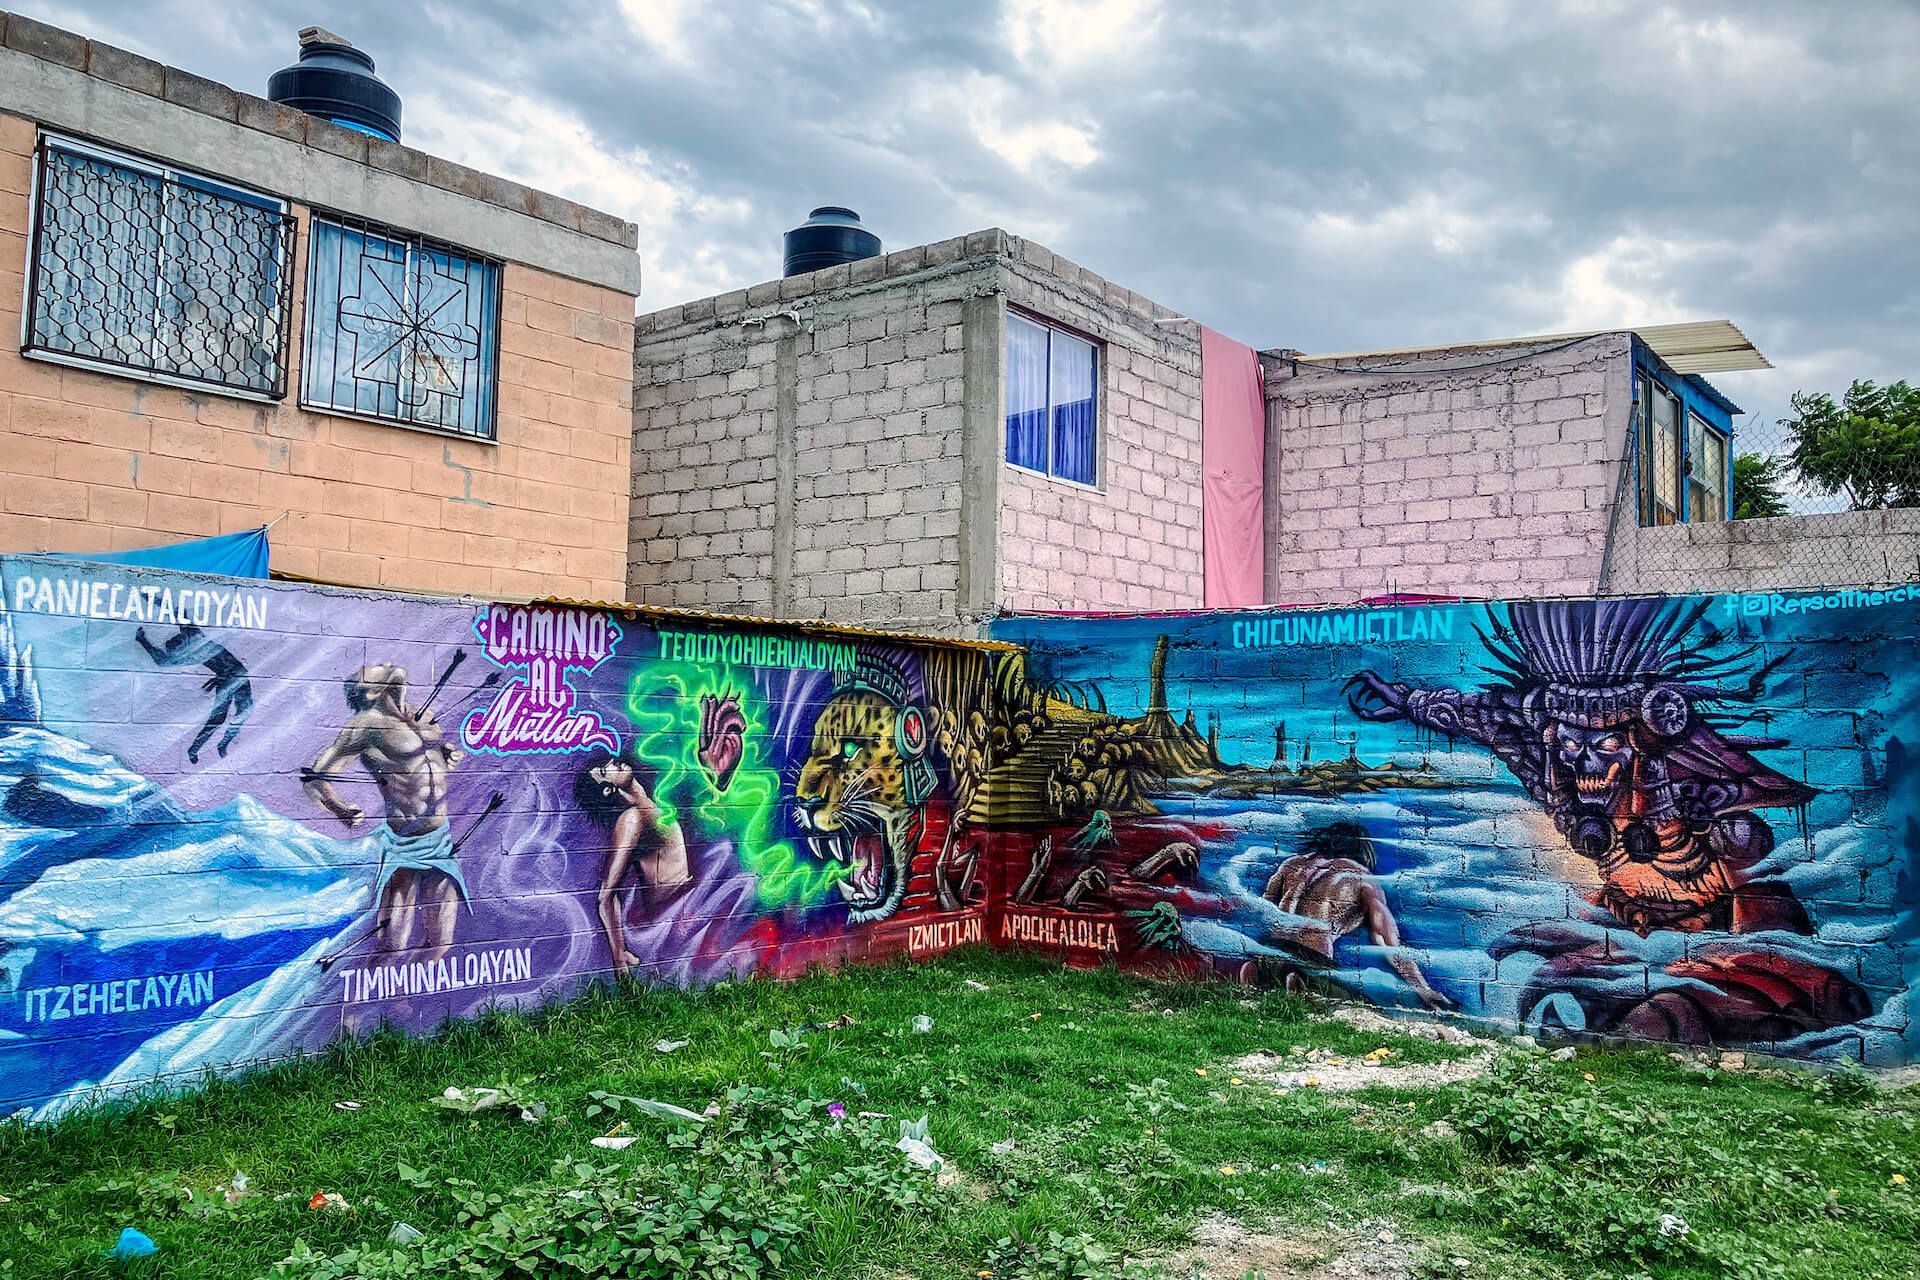 Aztec mythology-themed mural in the Ecatepec district.